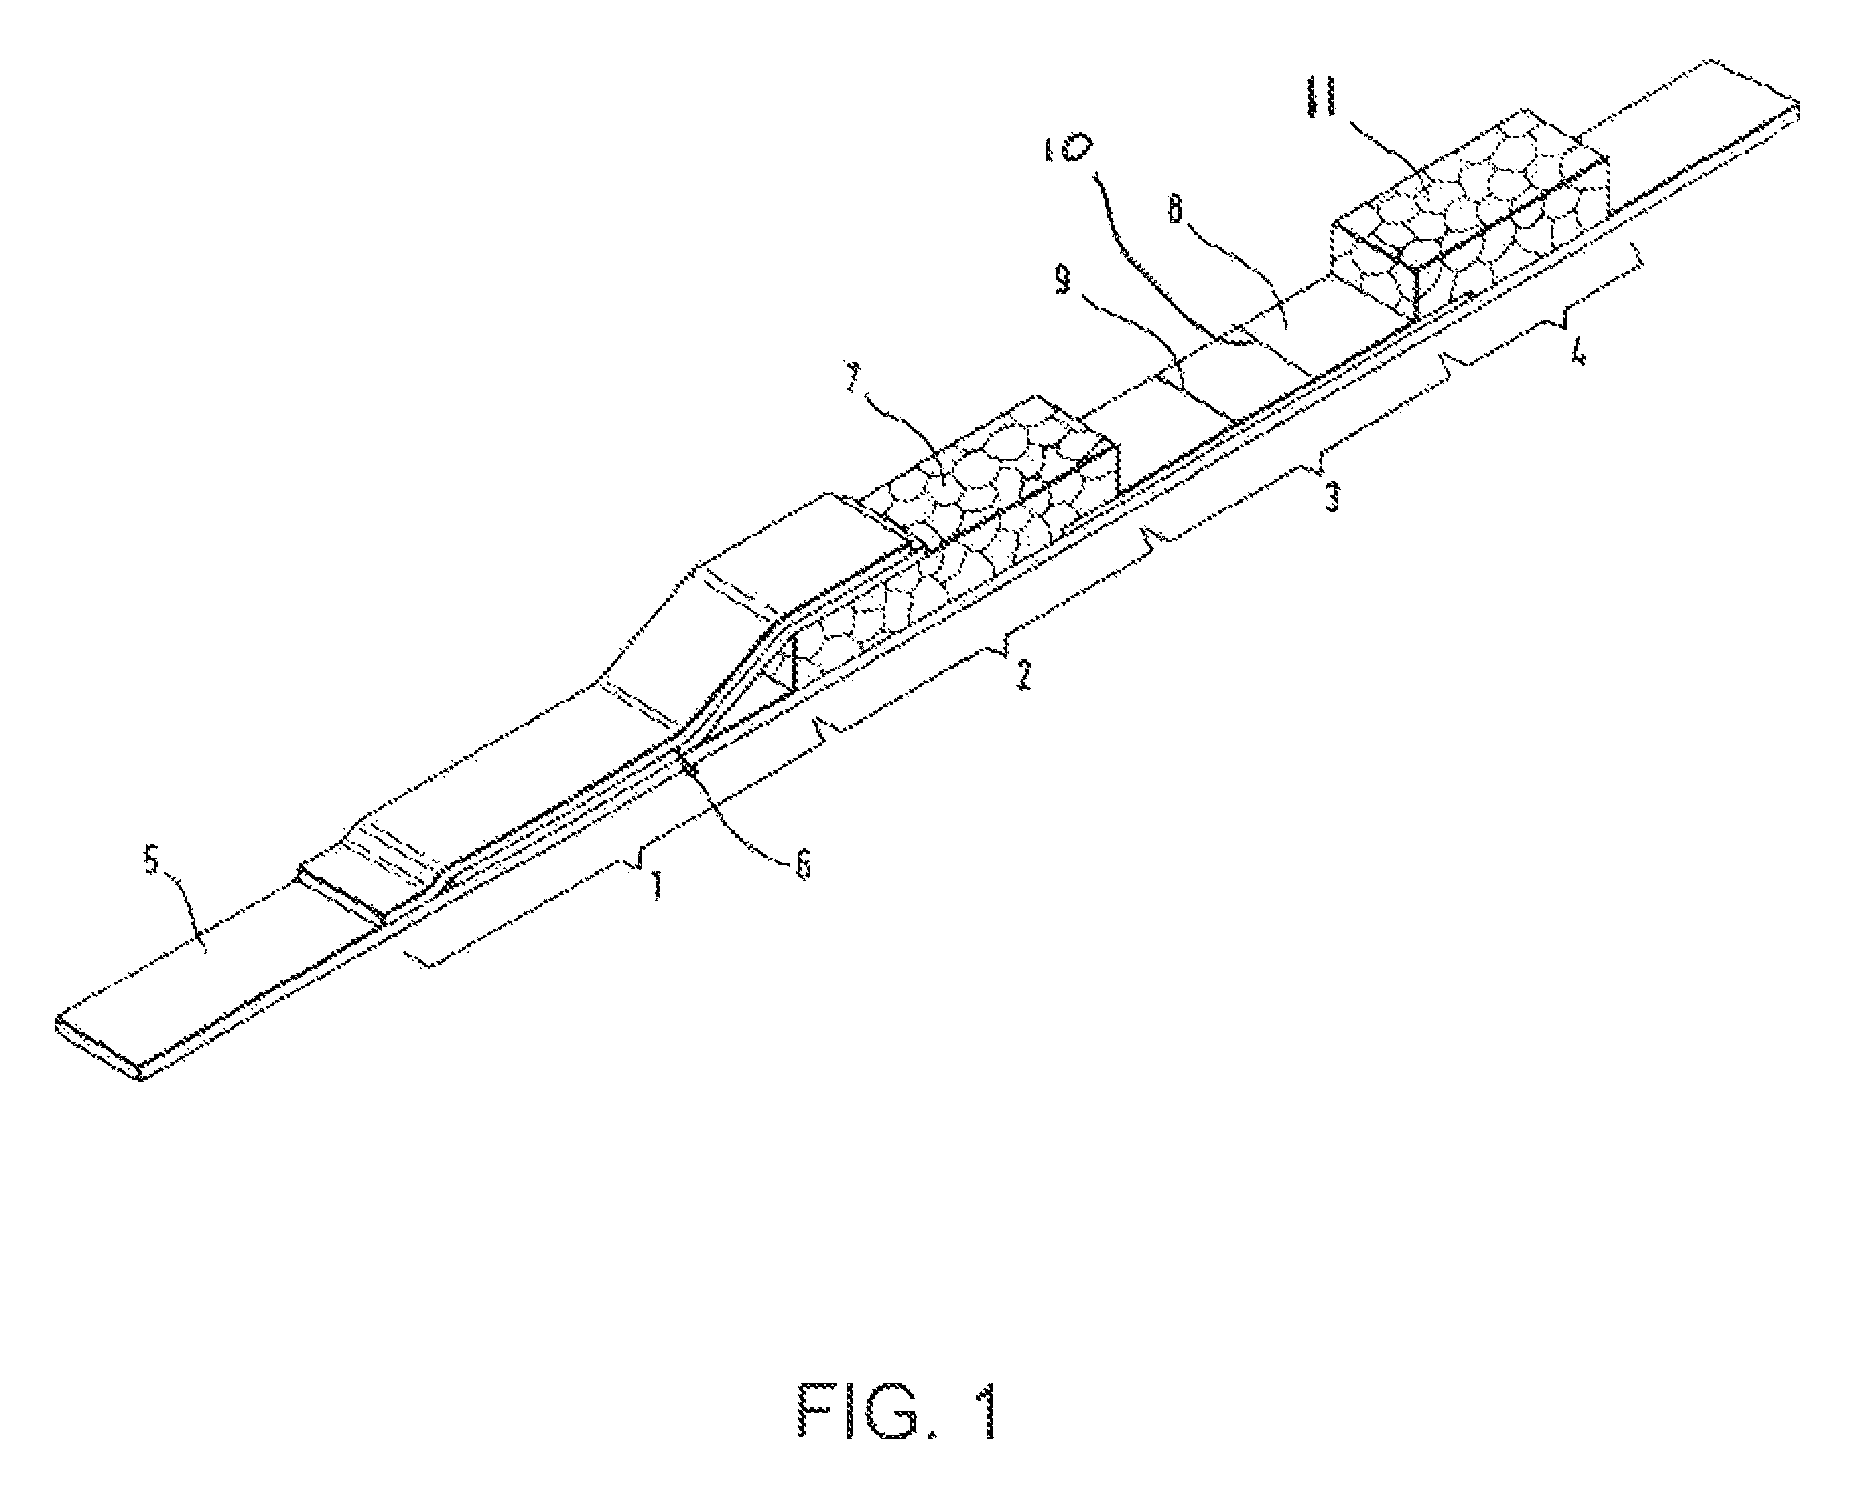 Method for increasing the dynamic measuring range of test elements based on specific binding reactions